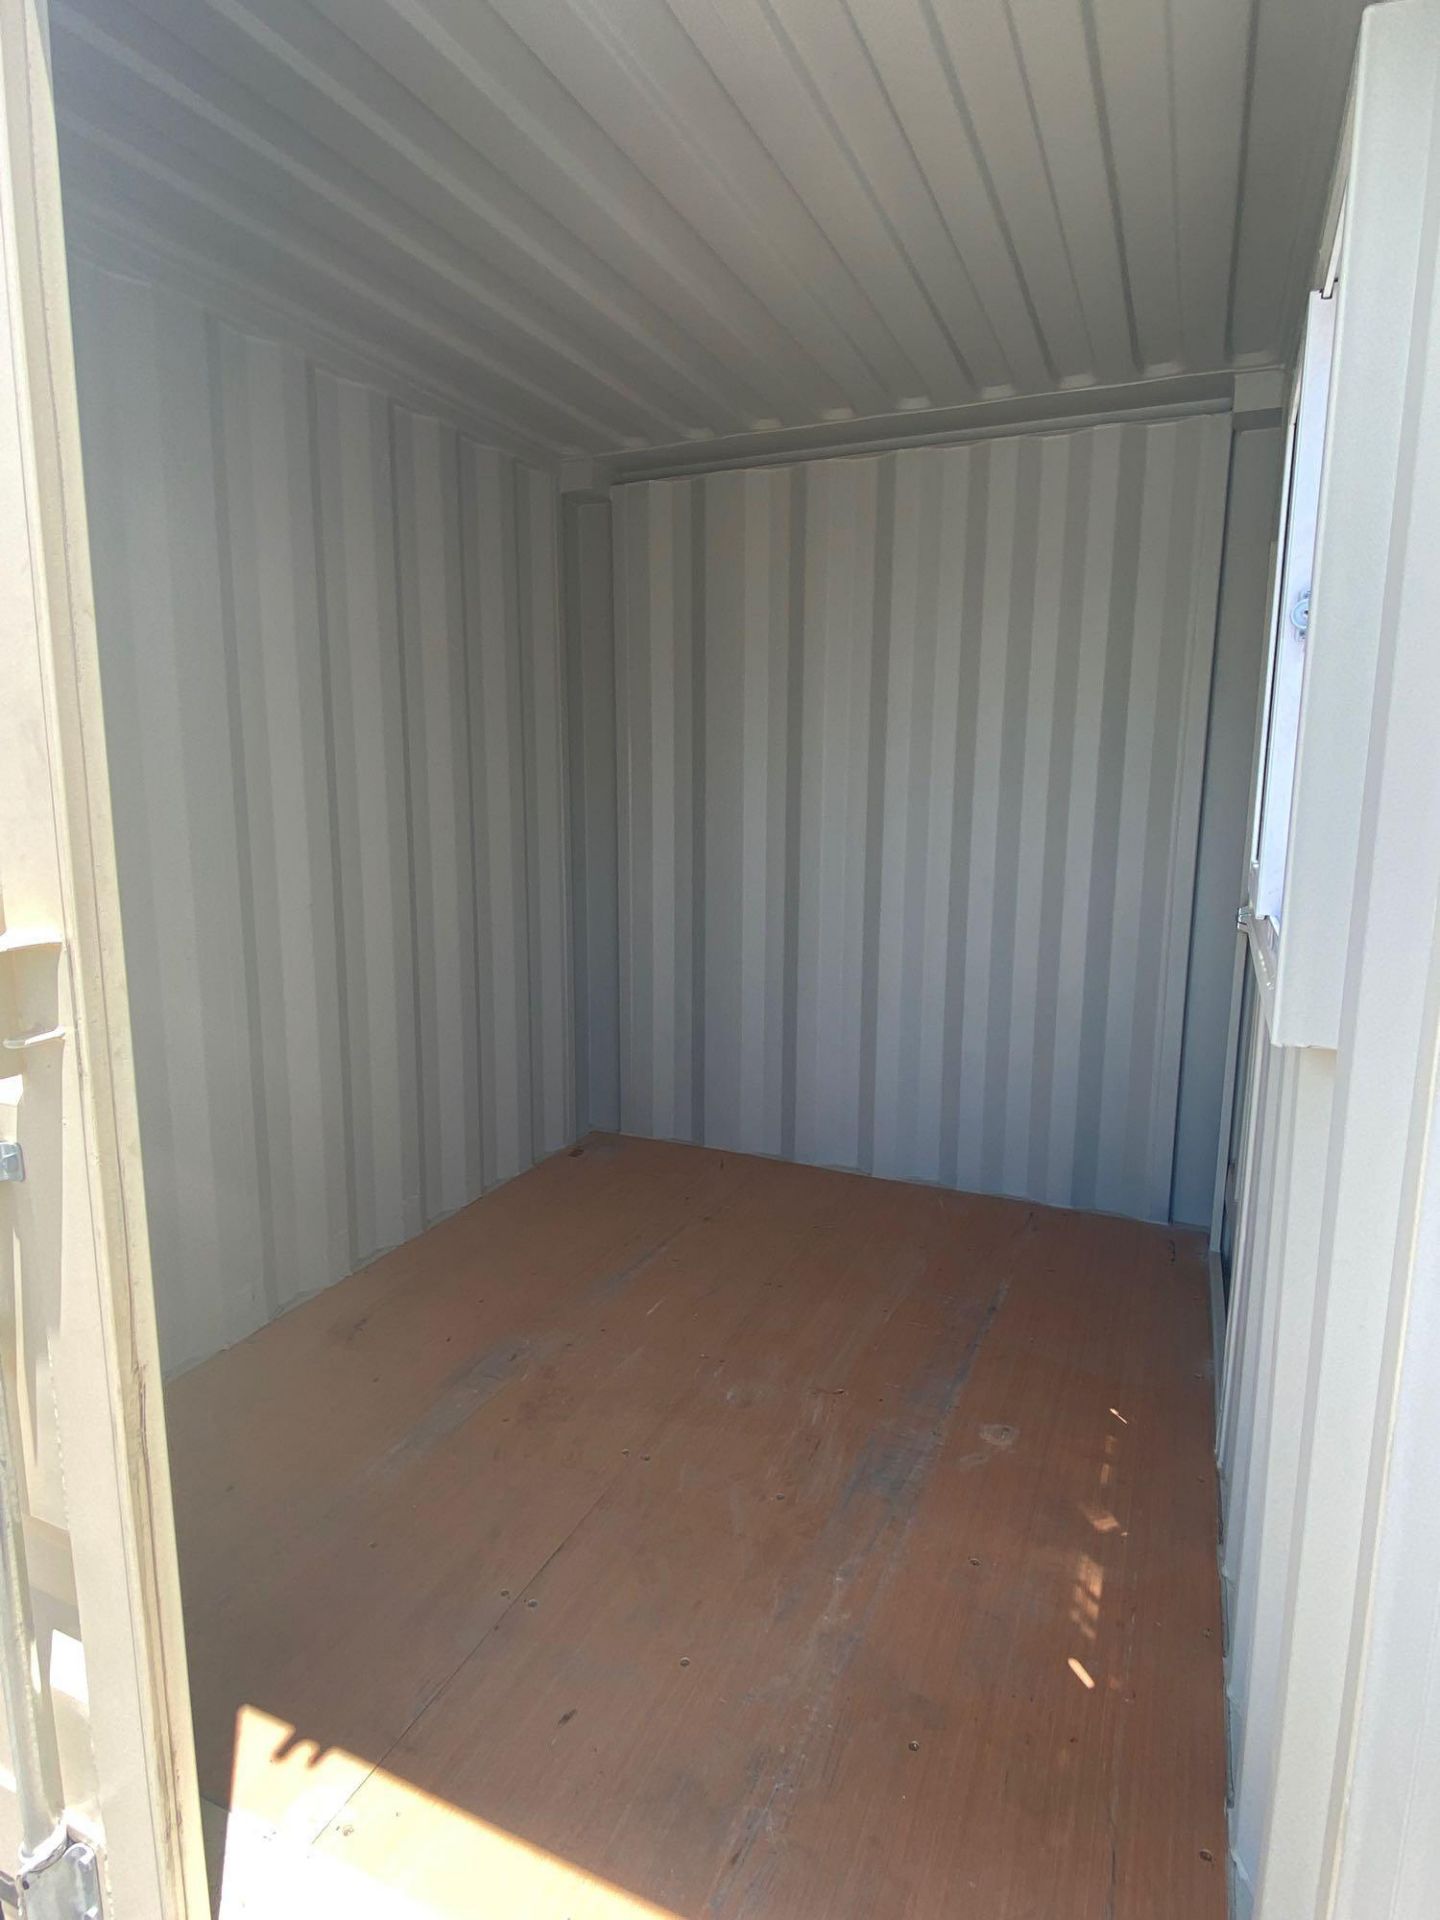 UNUSED 2020 PORTABLE OFFICE CONTAINER WITH WINDOW & SIDE DOOR. - Image 6 of 6